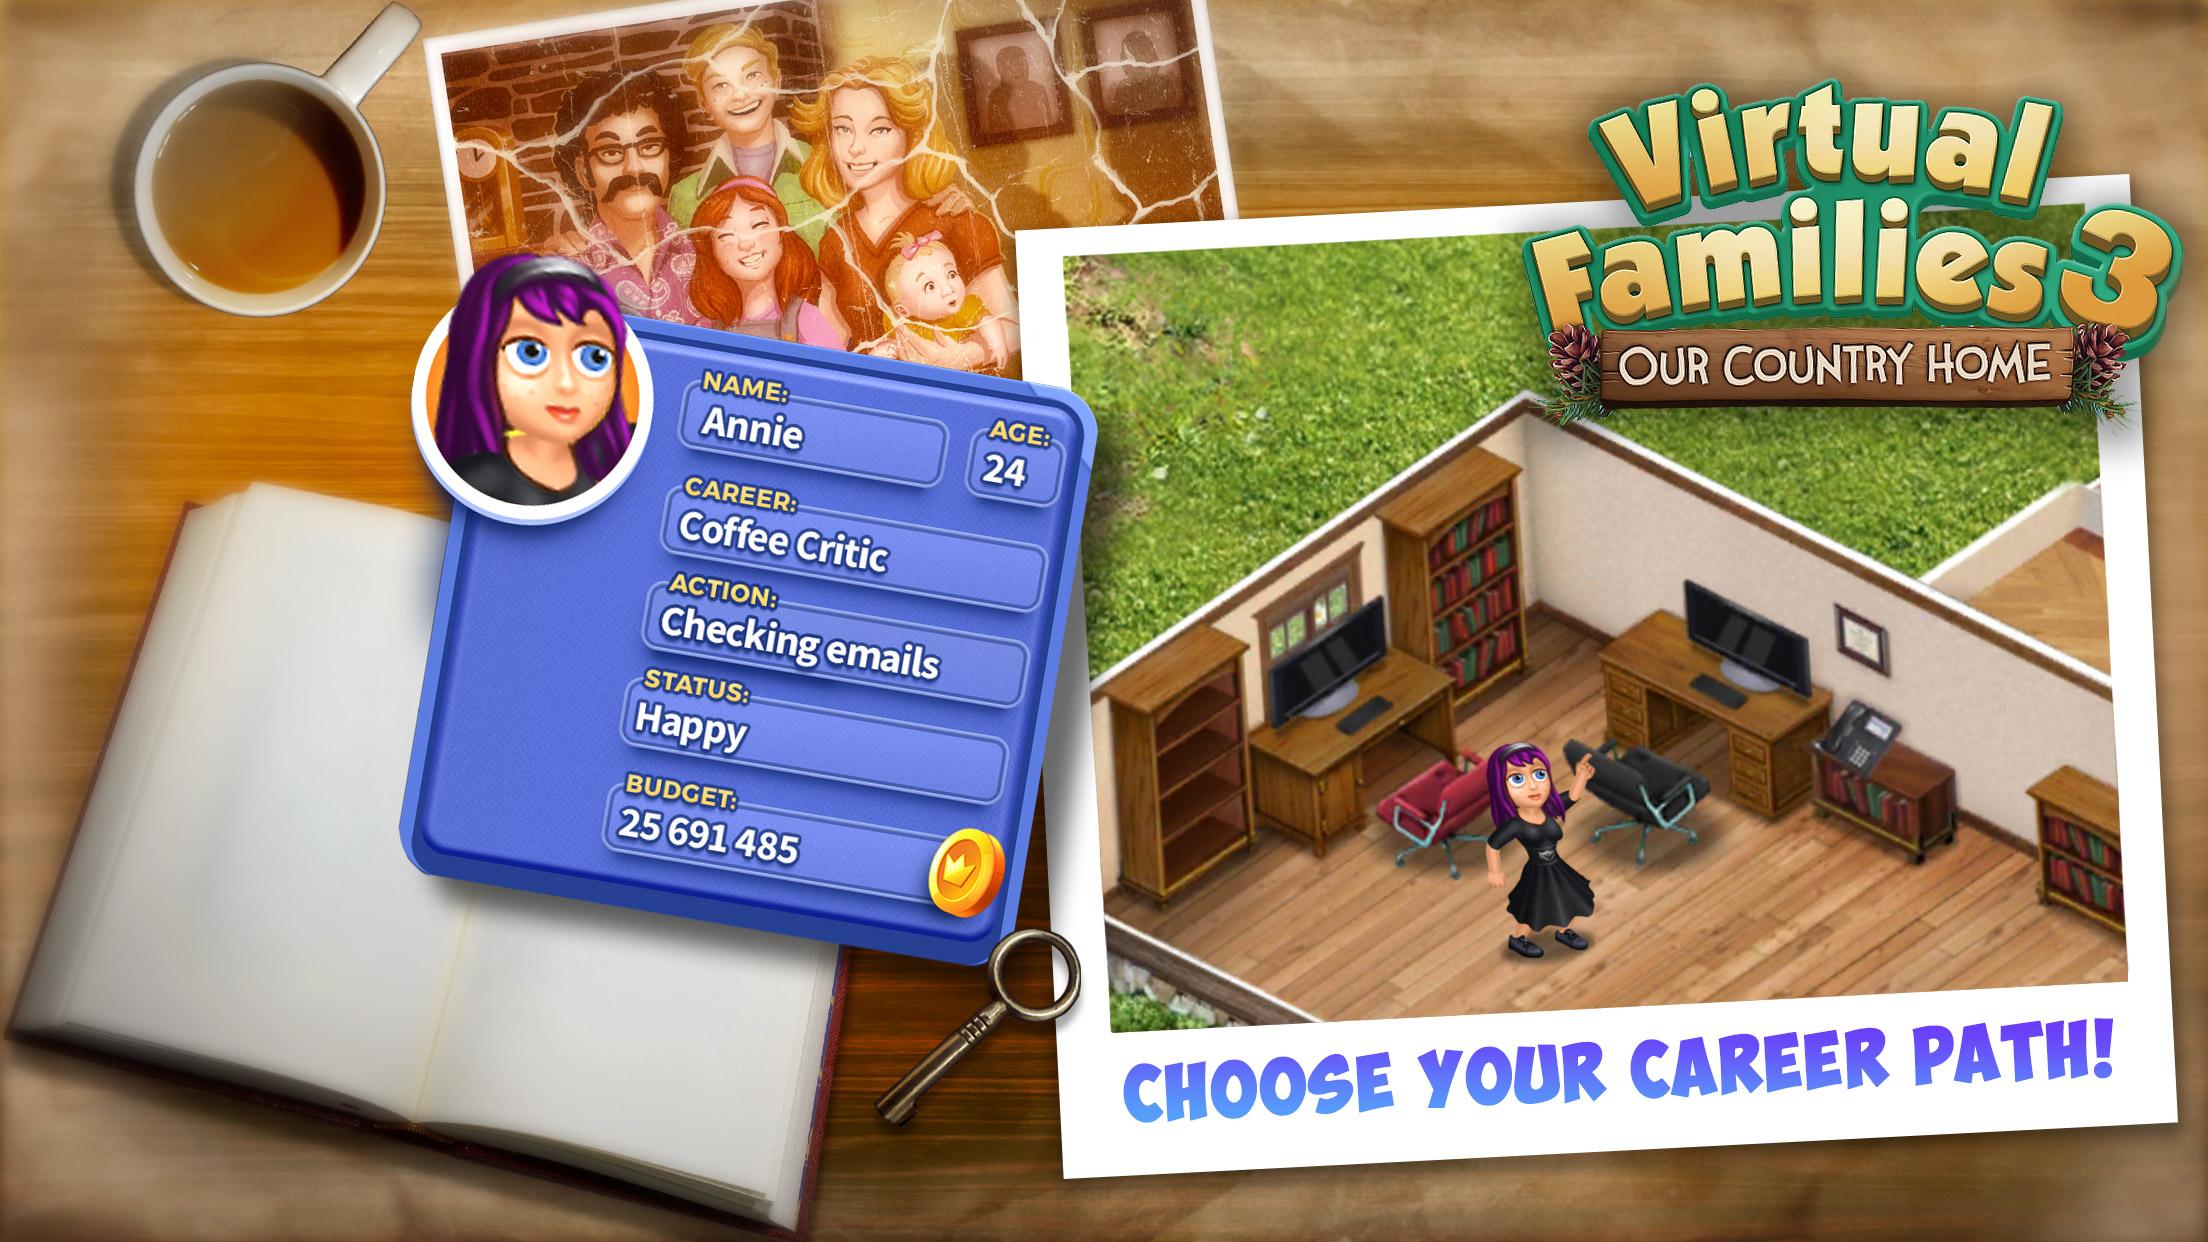 Shaping Your Virtual Families 3 Experience